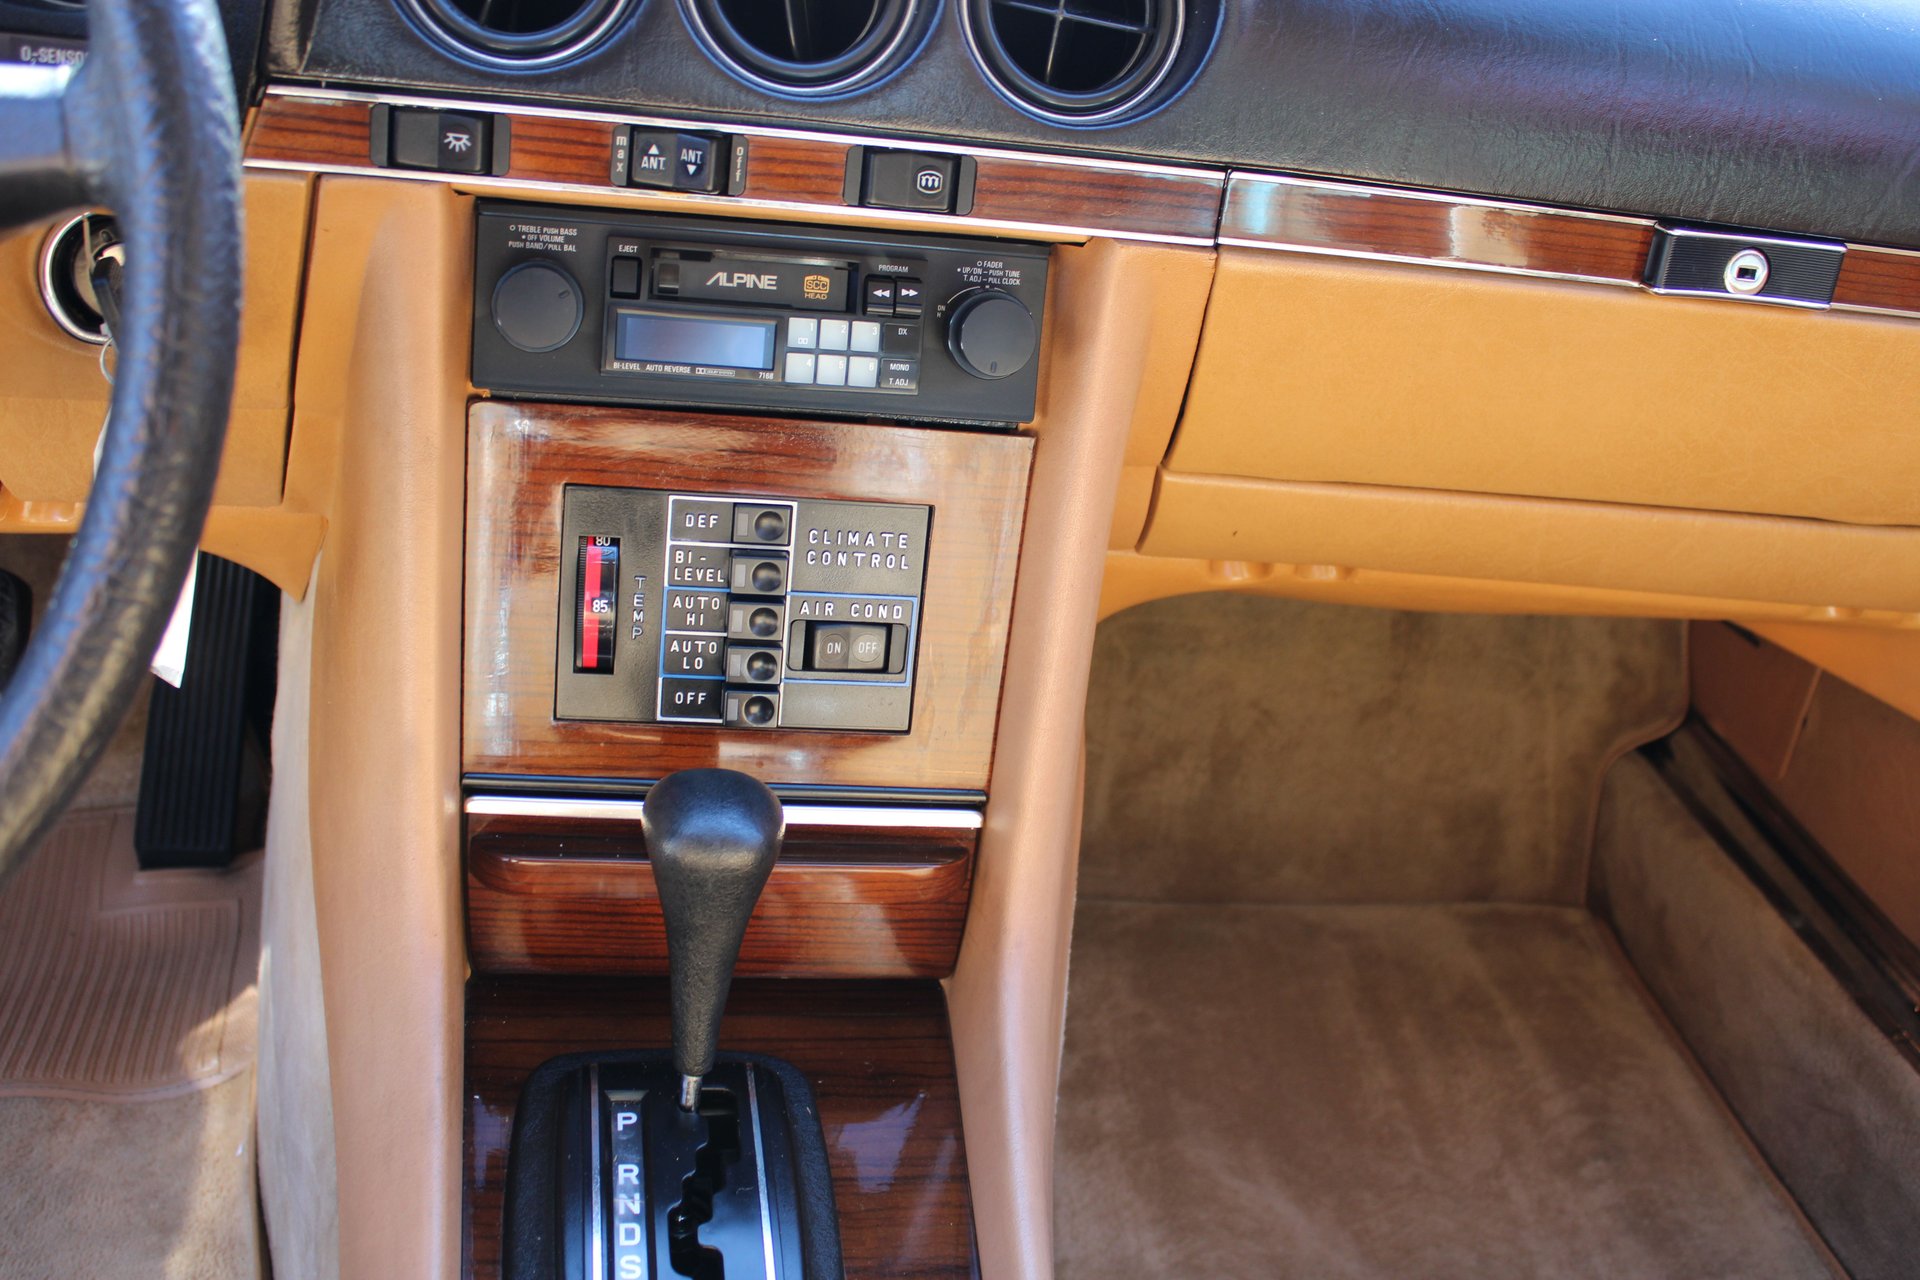 For Sale 1980 Mercedes 450SL